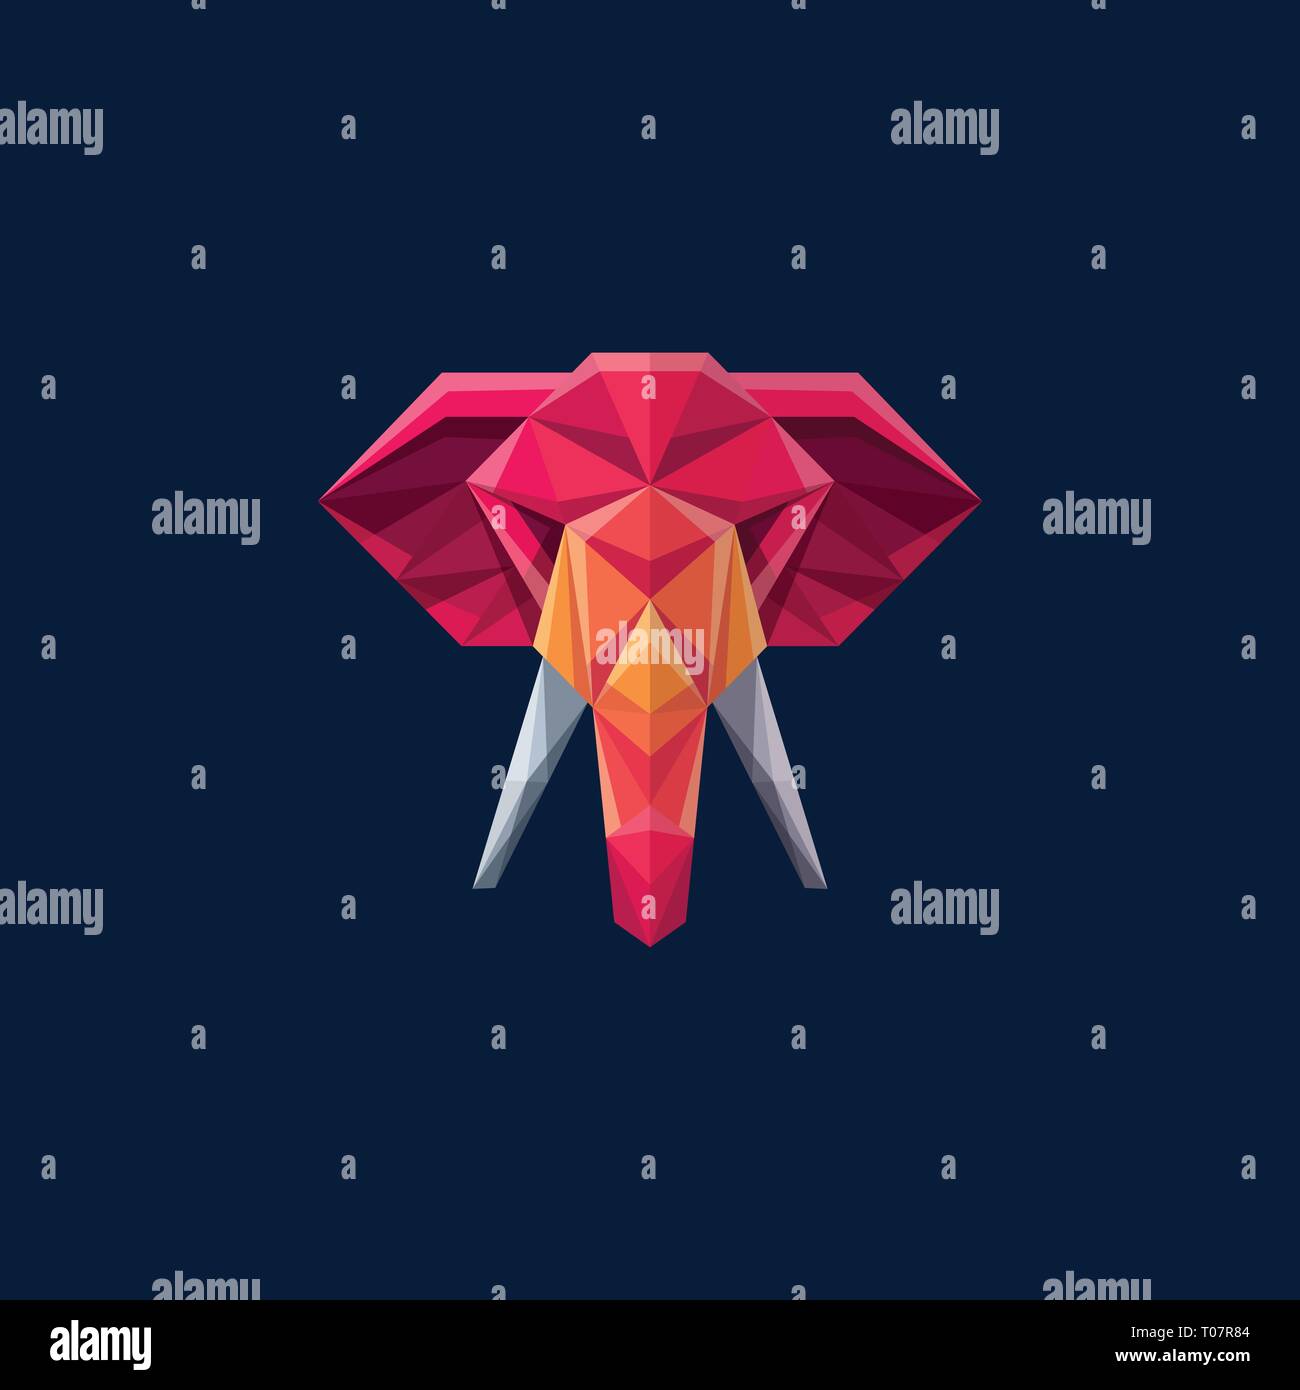 Elephant Geometric Design illustration vector template. Suitable for Creative Industry, Multimedia, entertainment, Educations, Shop, and any related b Stock Vector